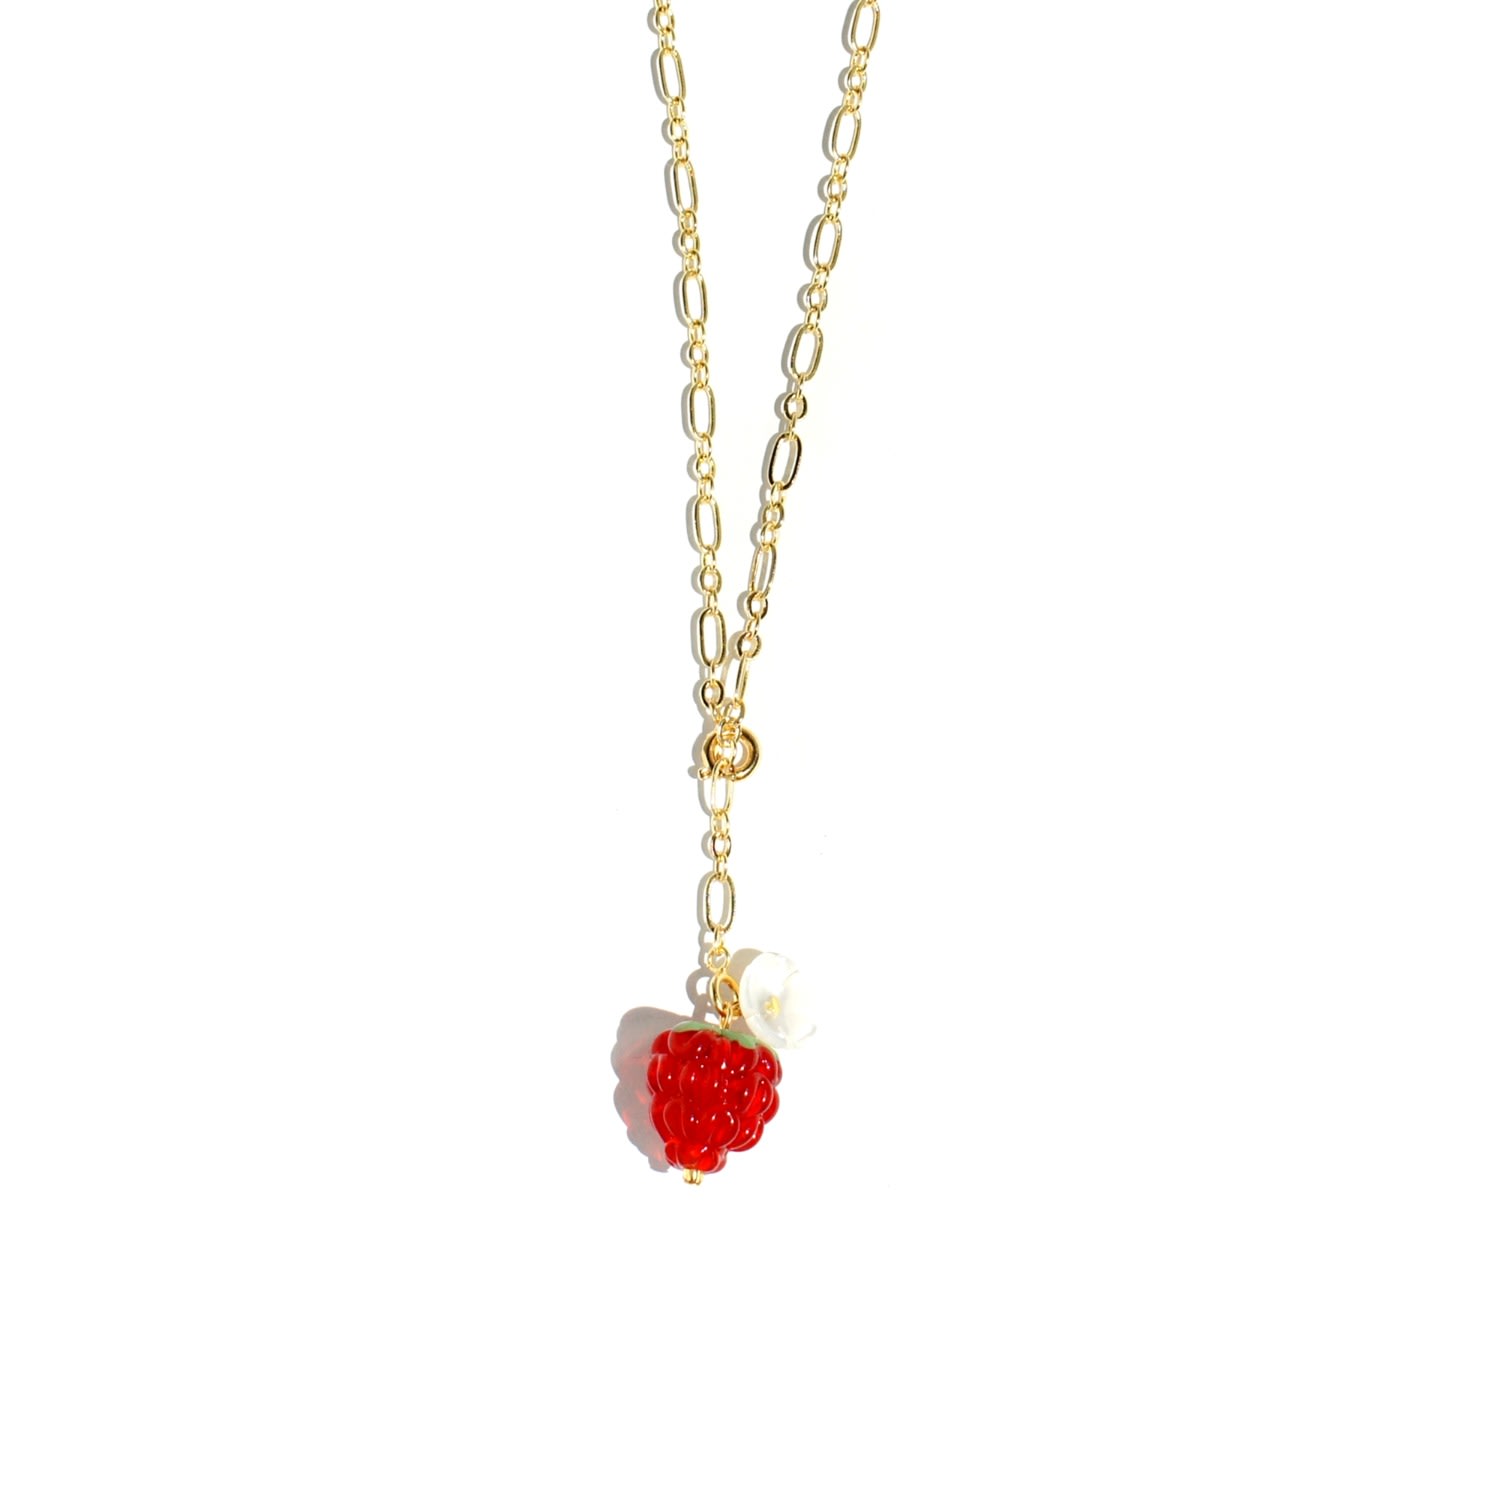 Women’s Red Very Berry Chain Necklace With Lampwork Glass Raspberry Pendant I’mmany London